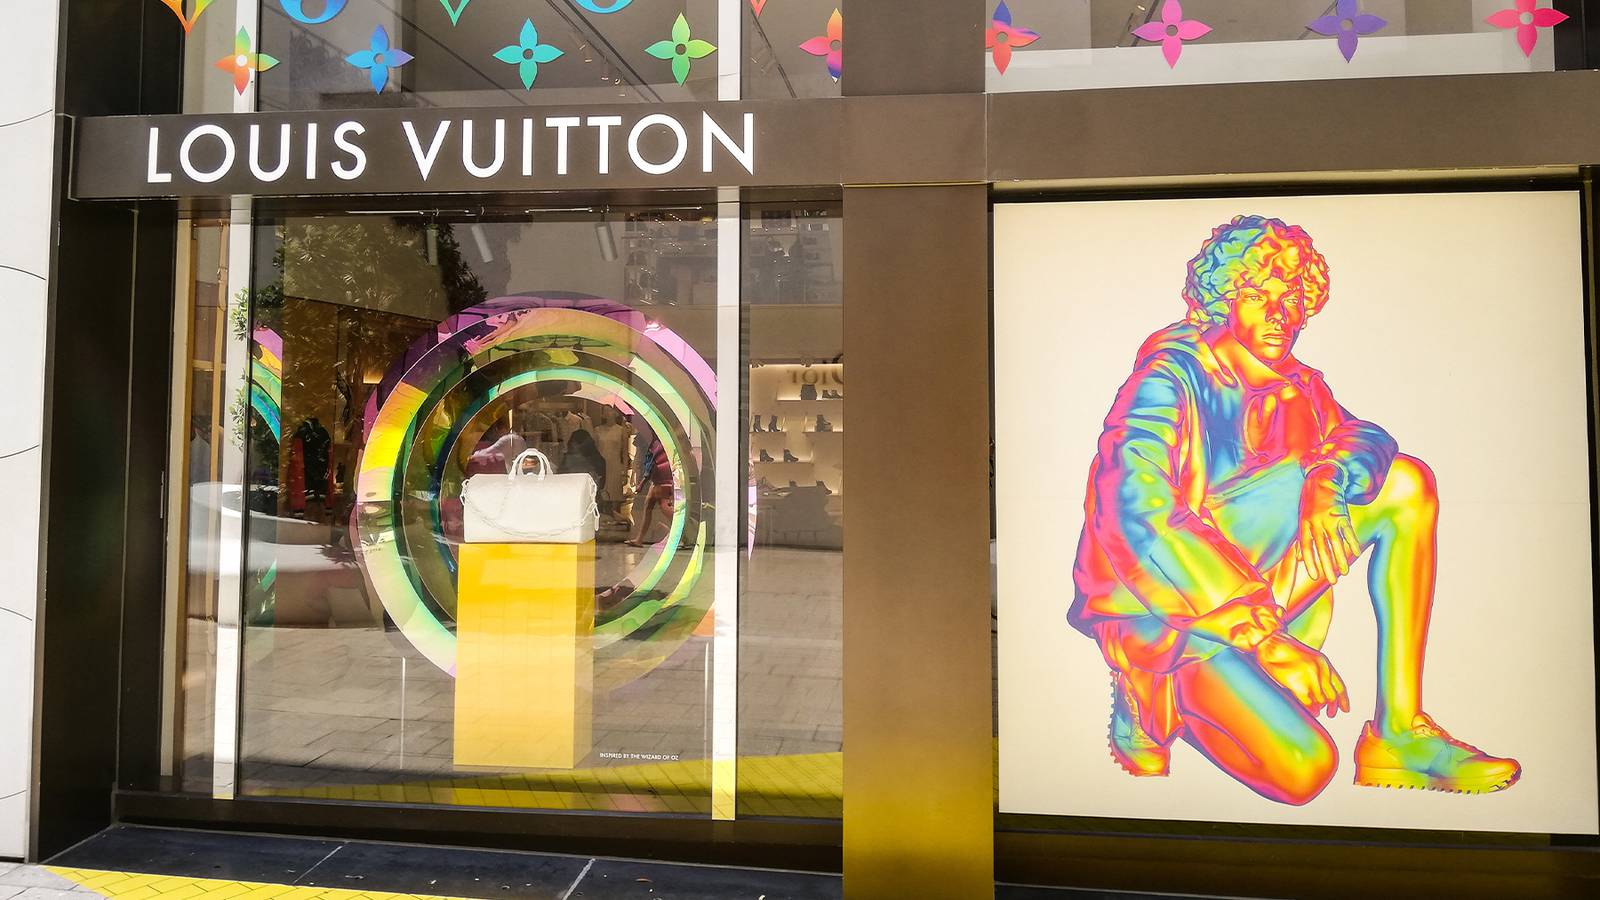 Bumper first half for LVMH buoyed by perfume and cosmetics - Retail Beauty